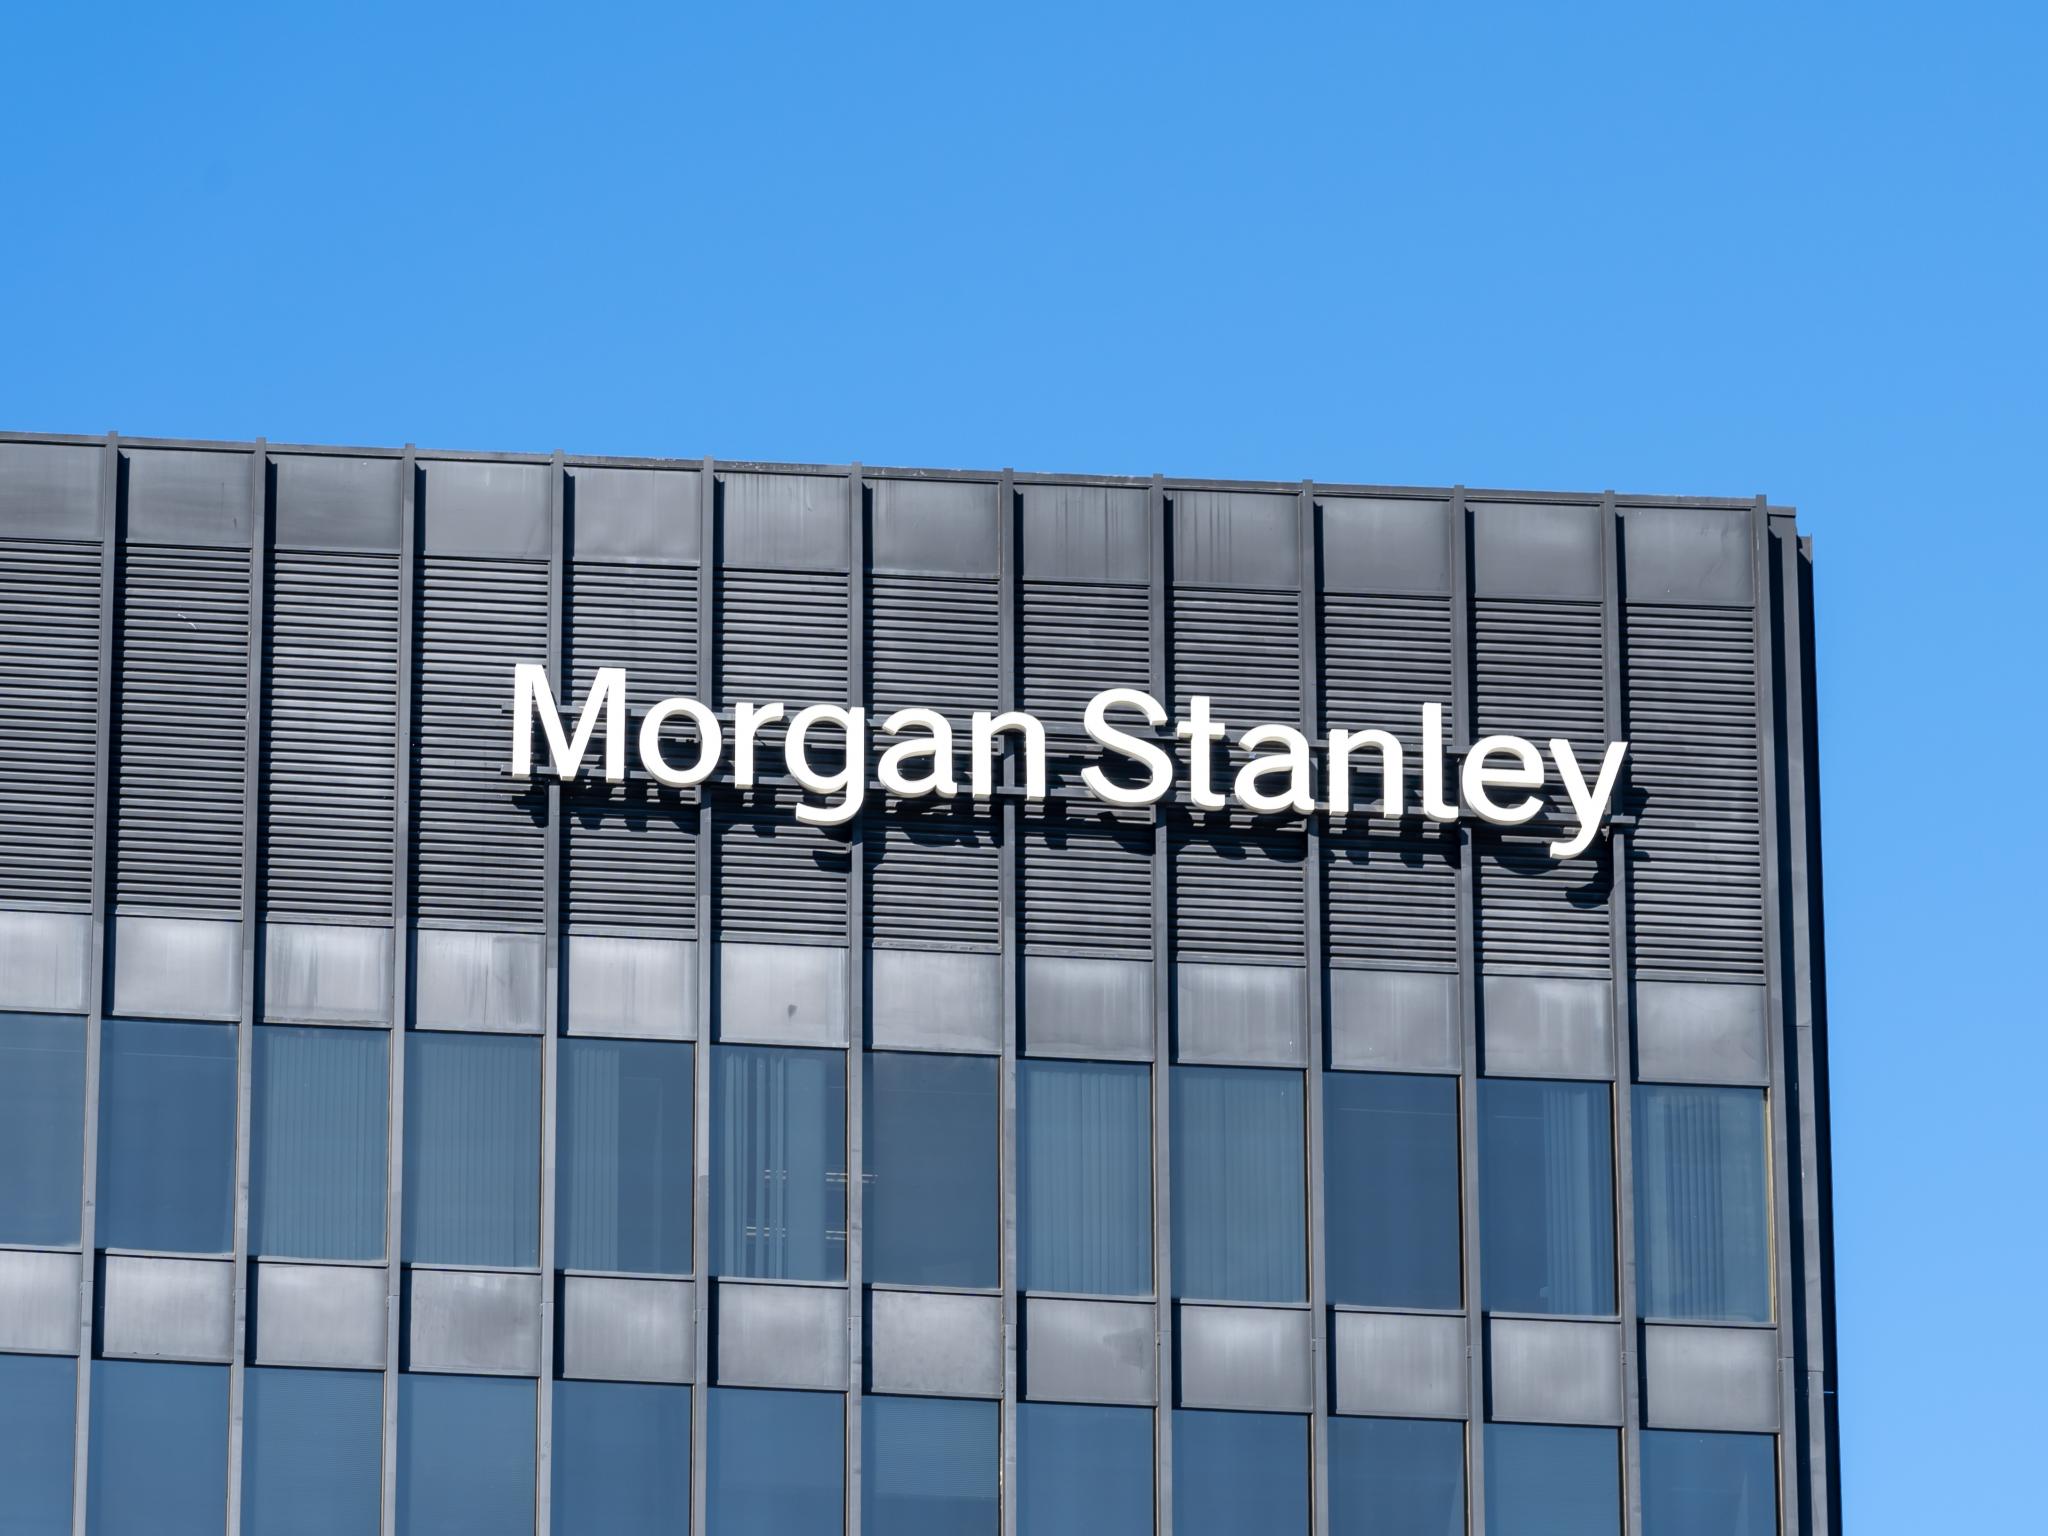 How To Earn $500 A Month From Morgan Stanley Stock Ahead Of Q1 Earnings